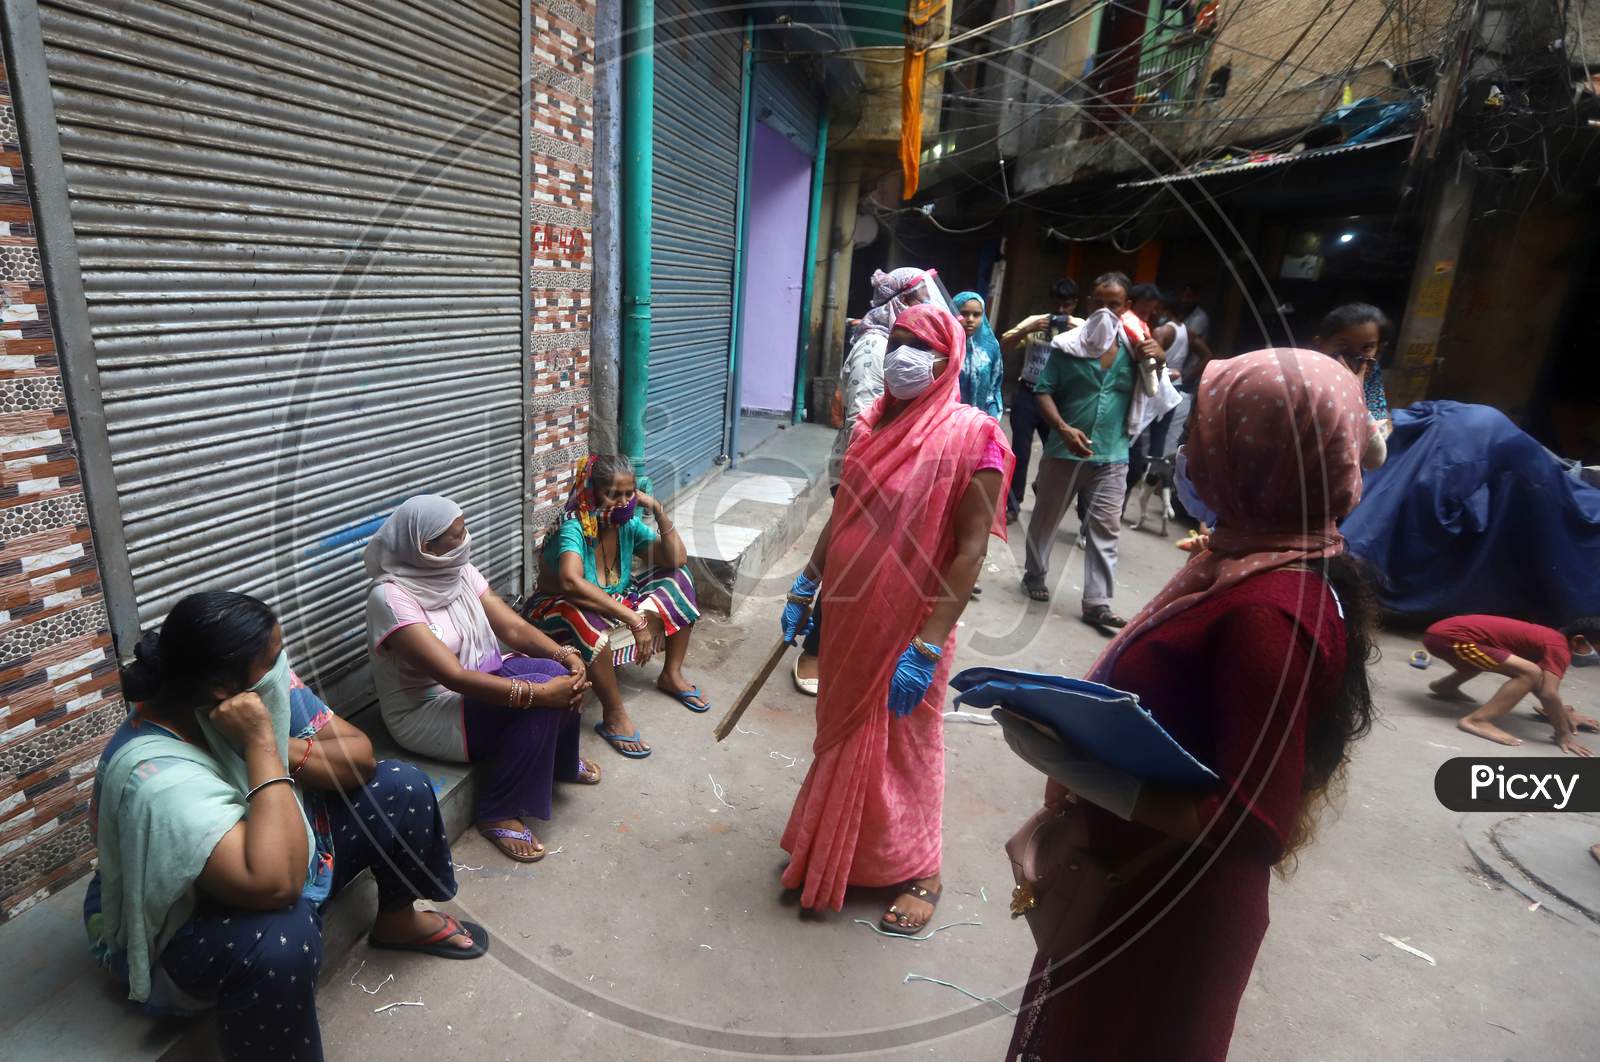 Health workers educating people on the importance of maintaining social distancing in a containment zone in Nabi Karim Area, New Delhi on July 06, 2020